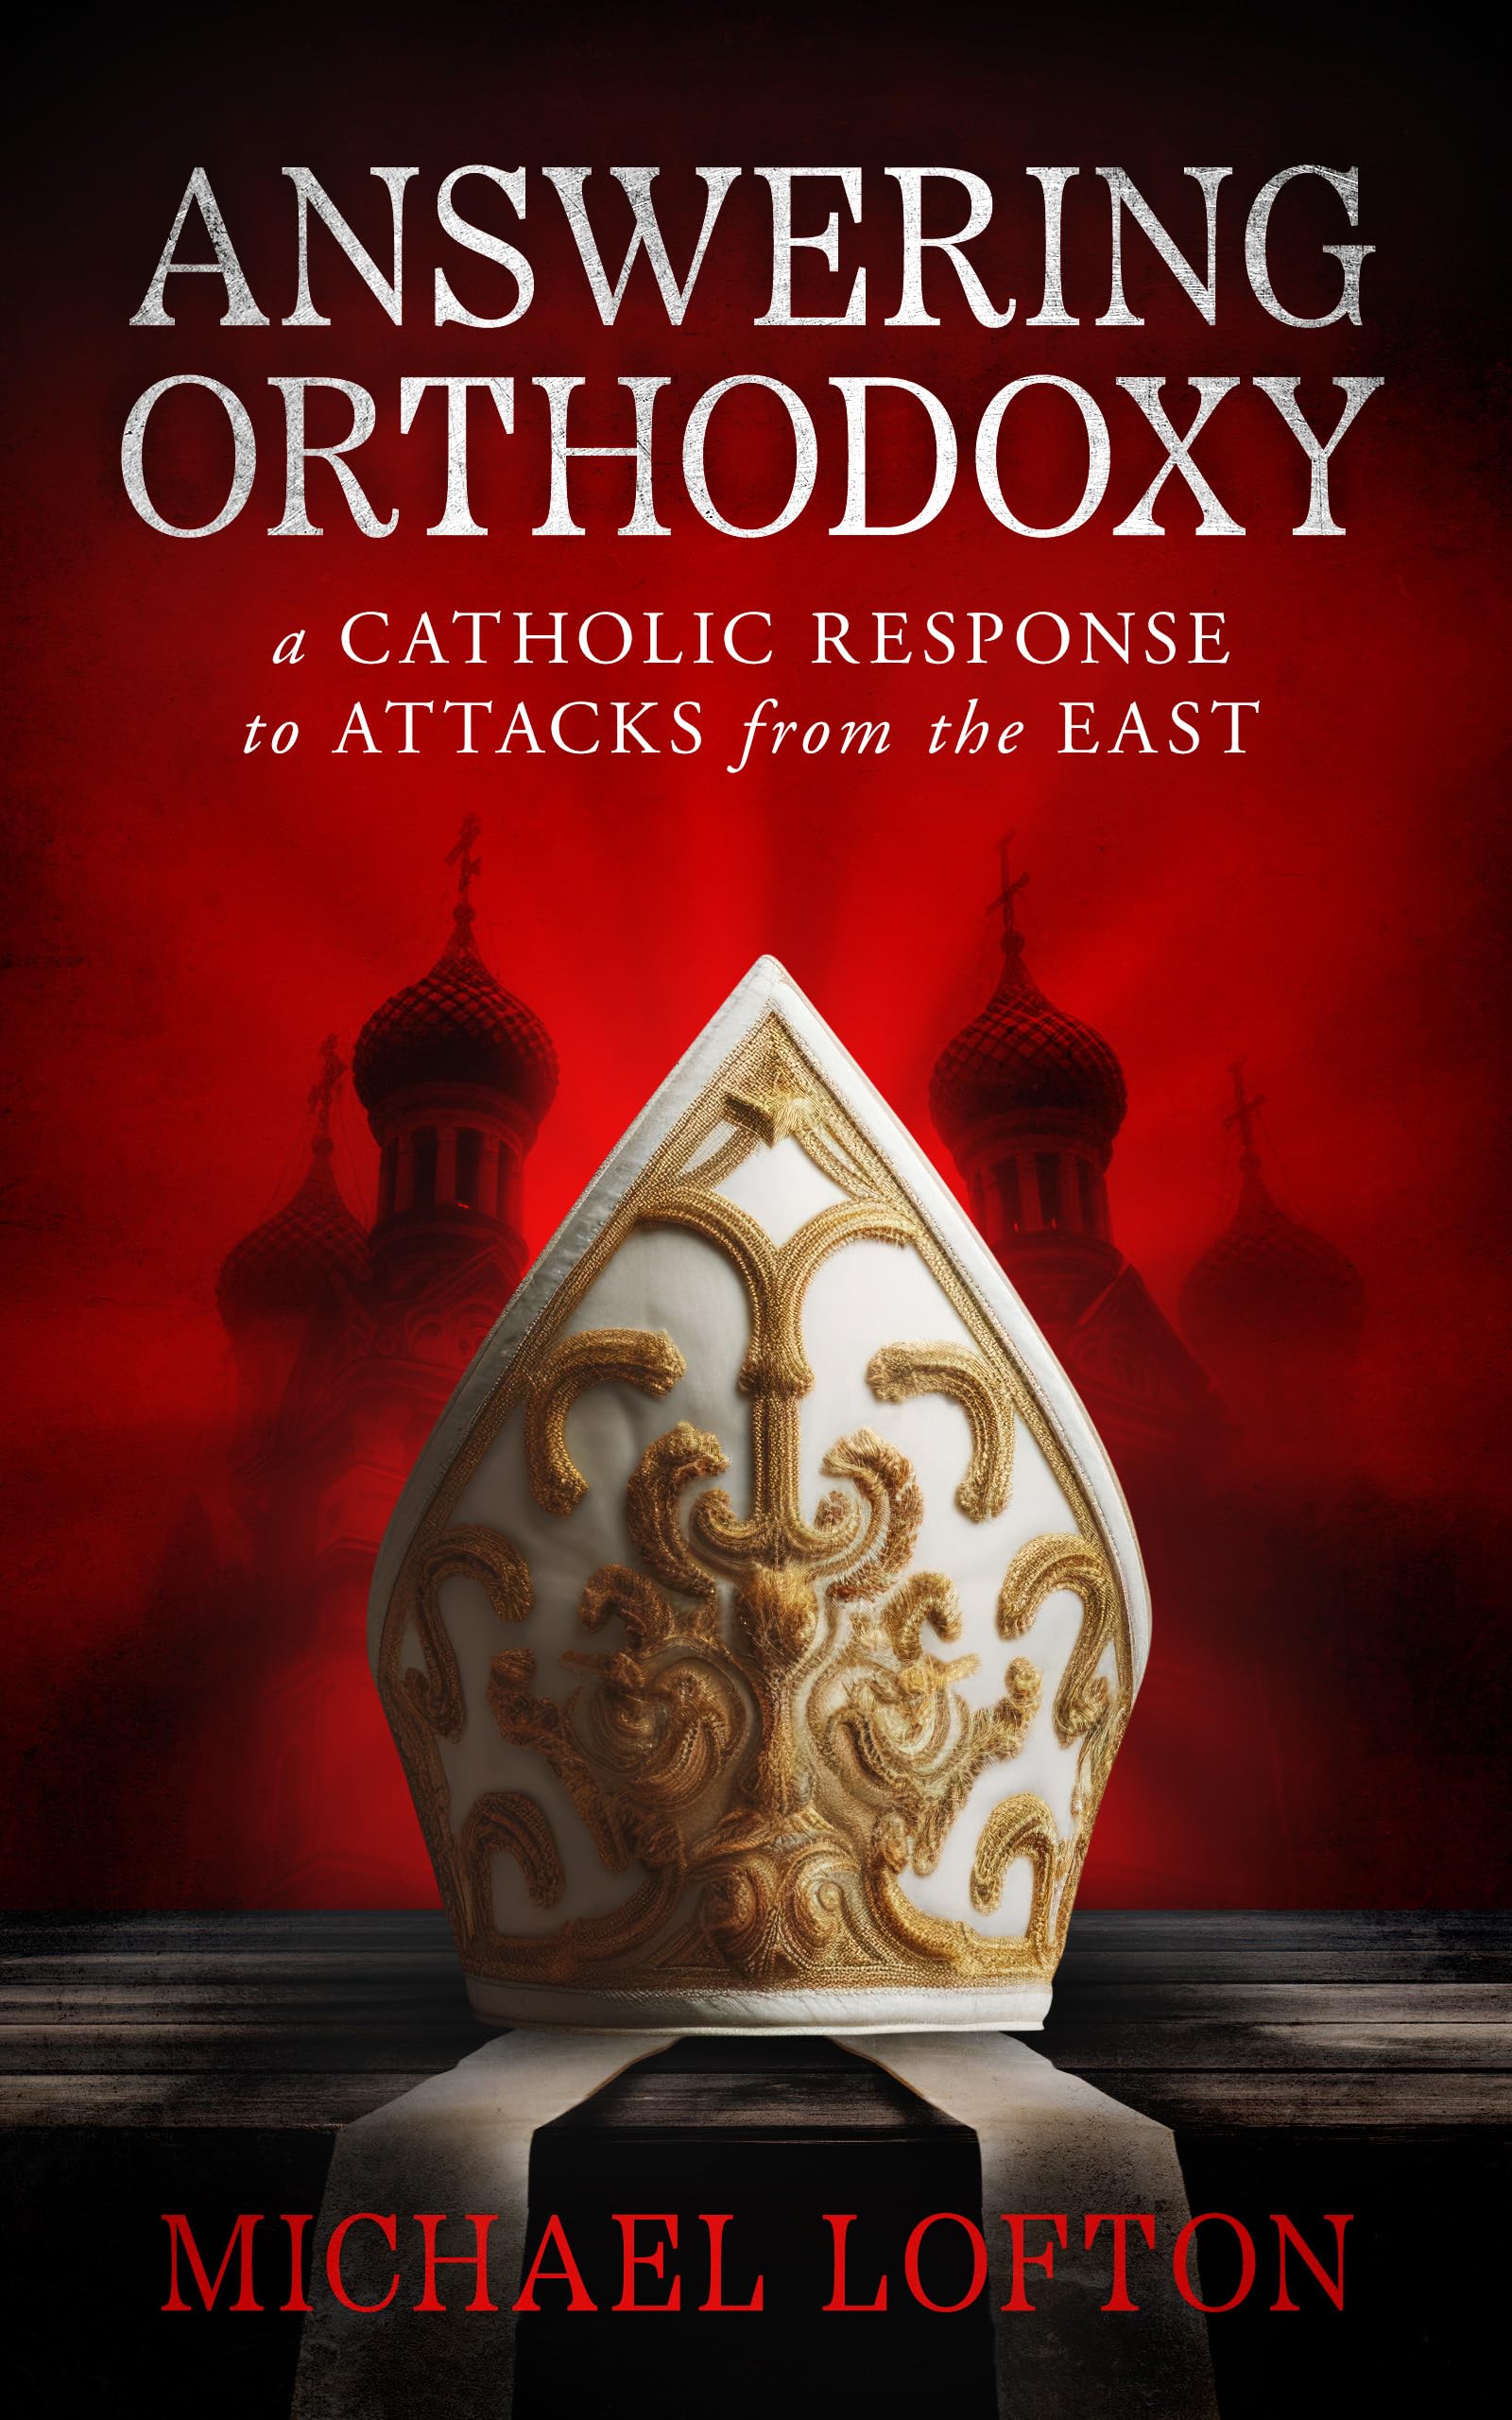 Answering Orthodoxy - A Catholic Response to Attacks from the East